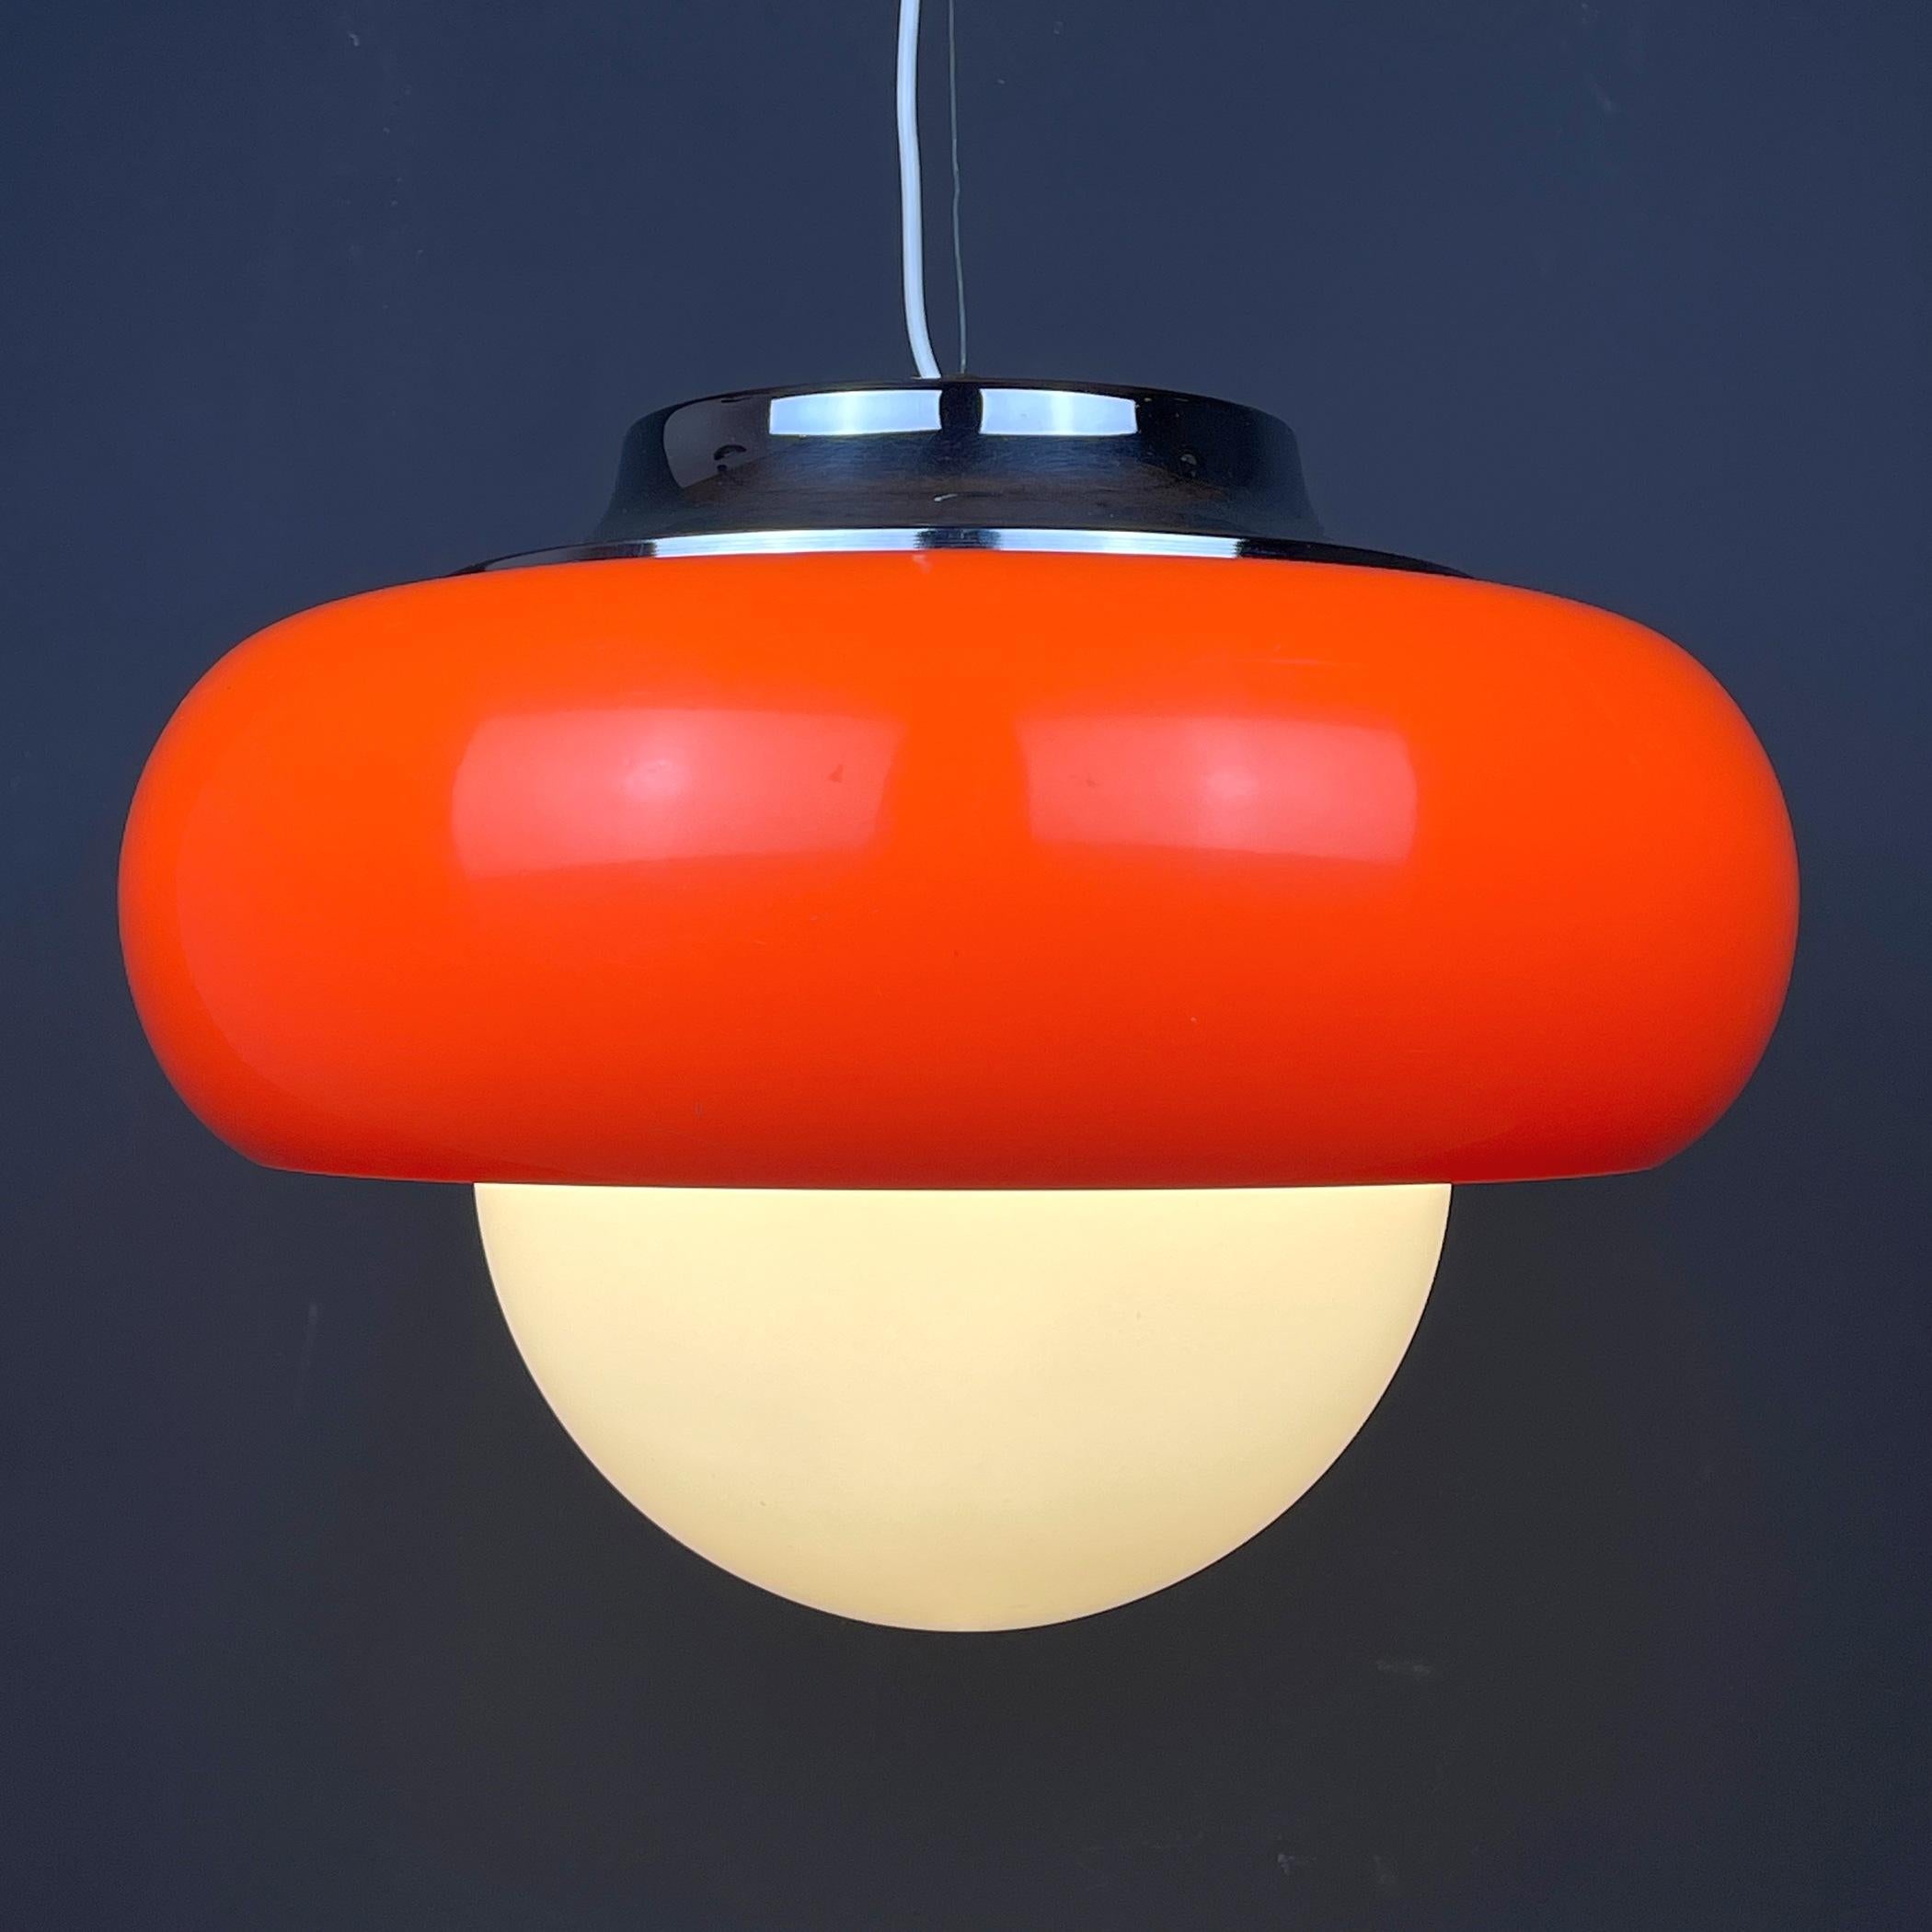 Transform your living space with this stunning mid-century pendant lamp from the 1970s, produced by Meblo, Yugoslavia, as part of the renowned Guzzini collection. Guzzini, an esteemed Italian lighting manufacturer, is celebrated for its space age